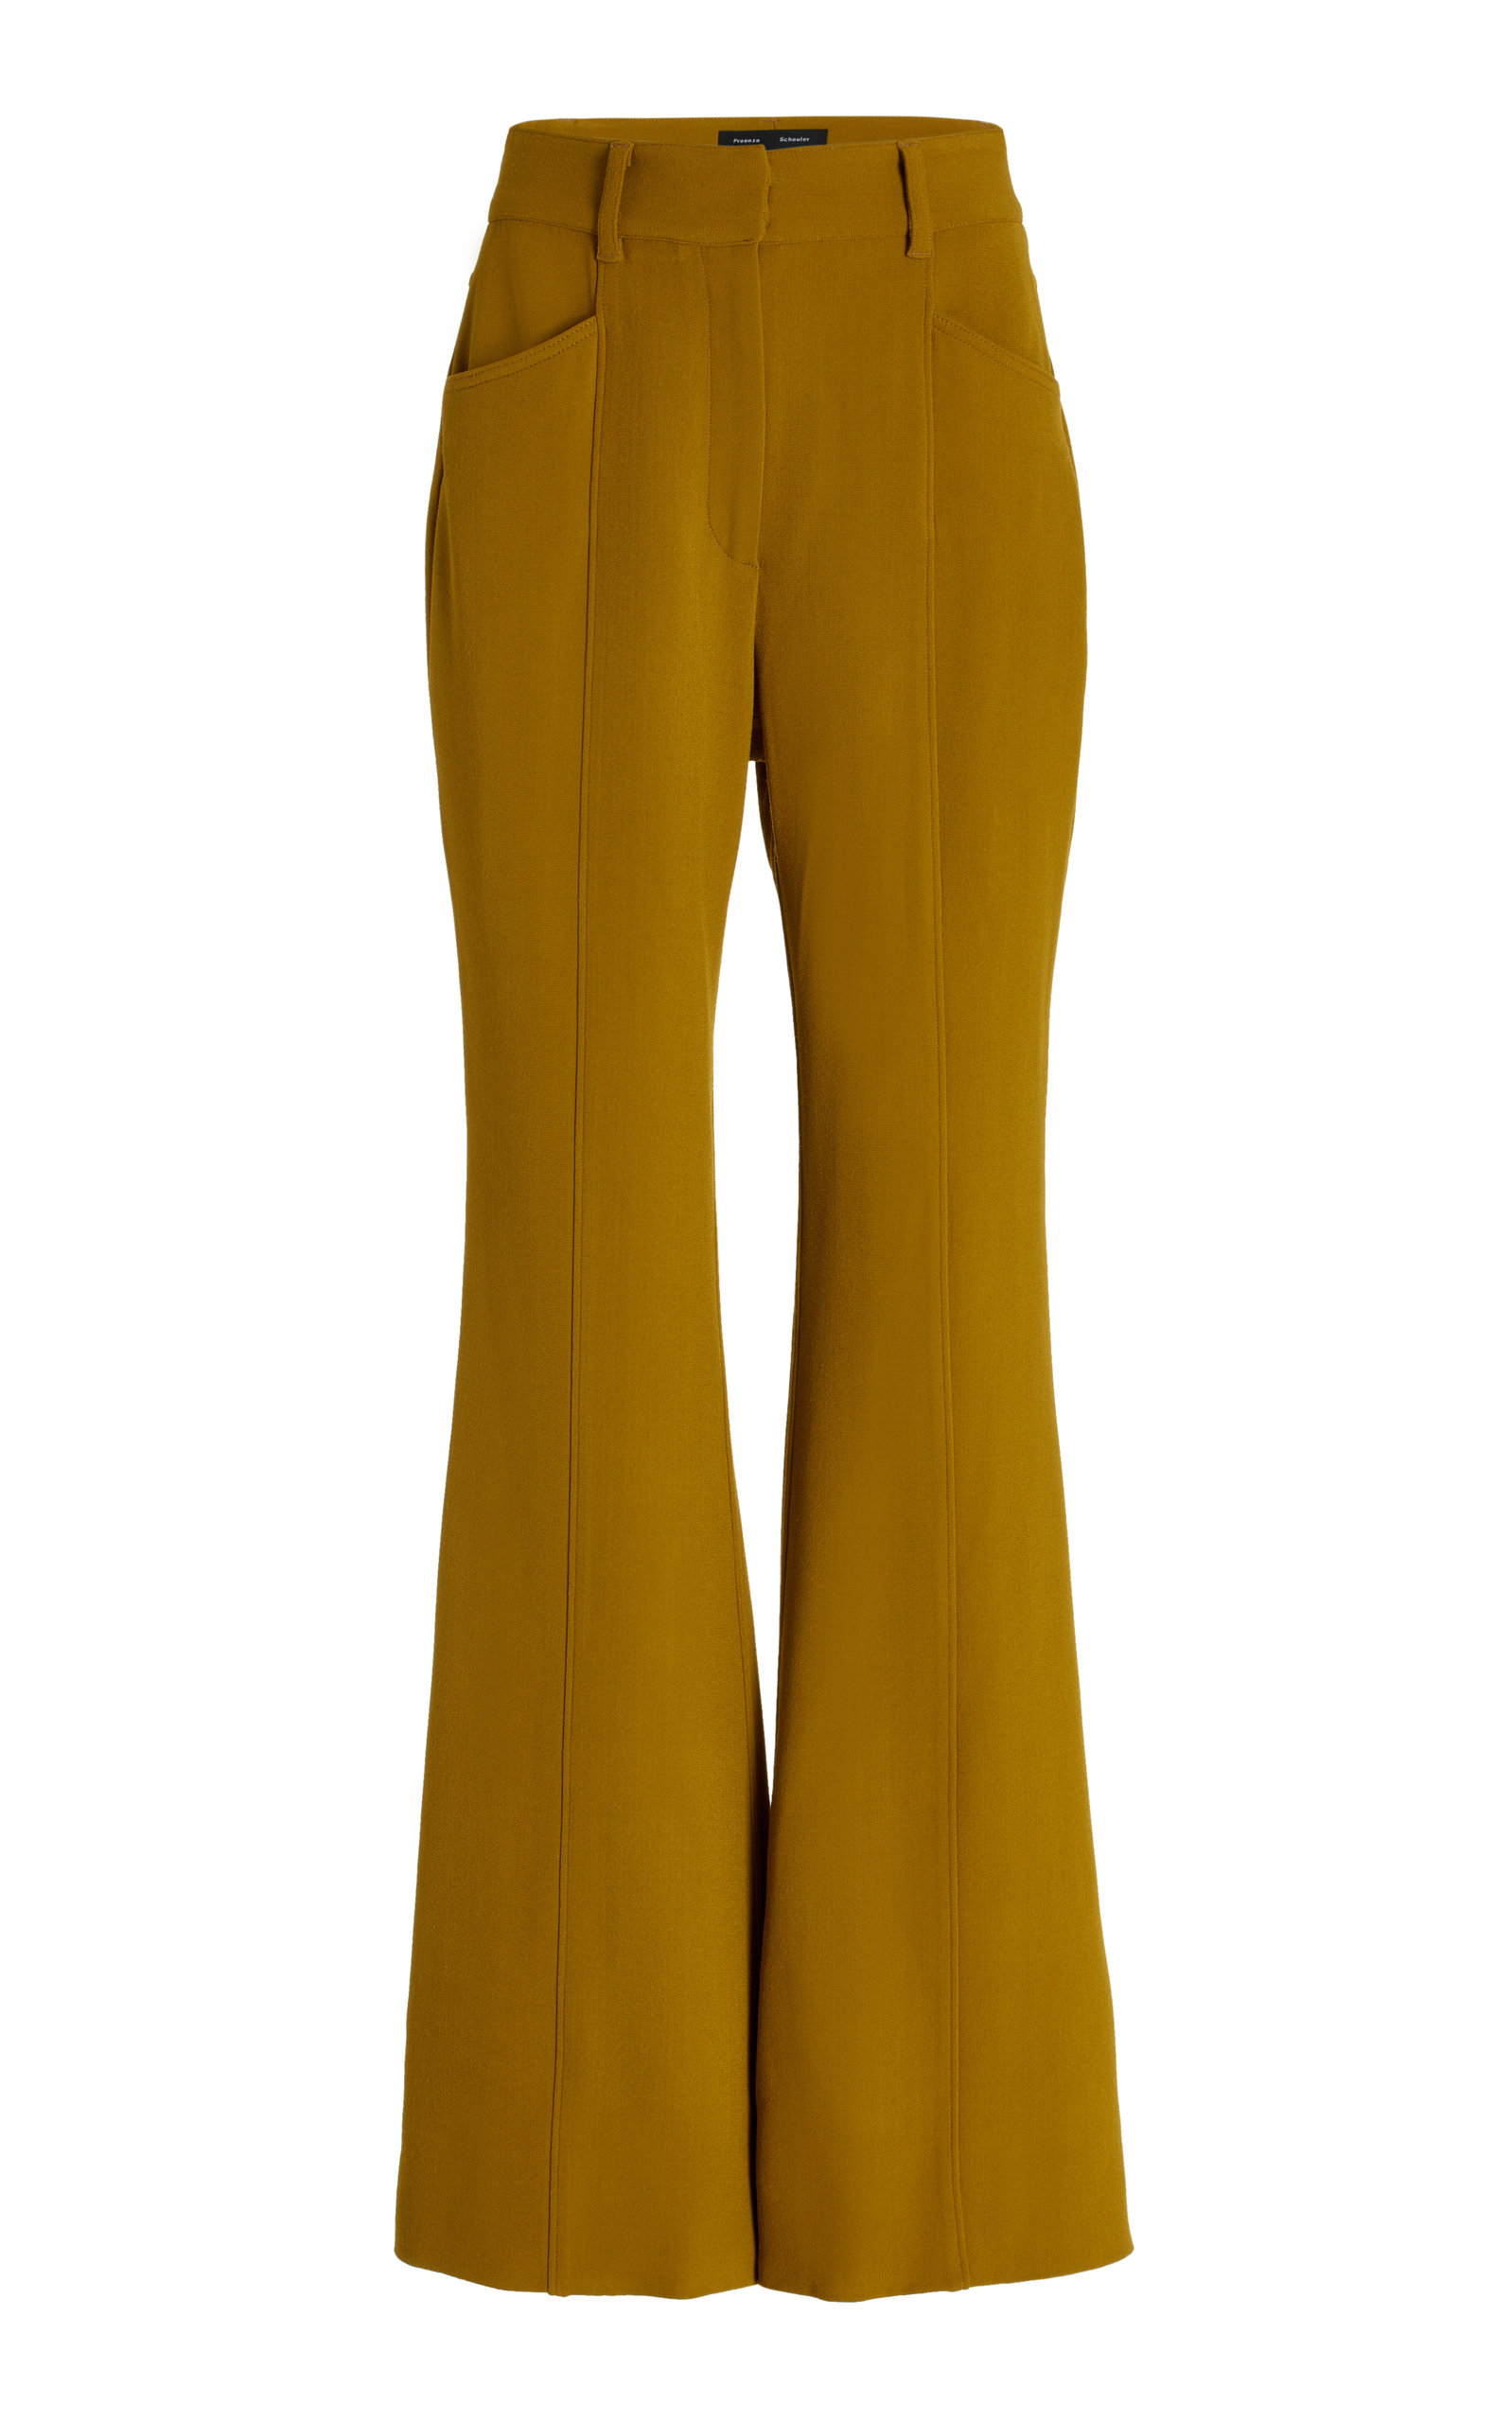 Stretch-Crepe Flared Pants